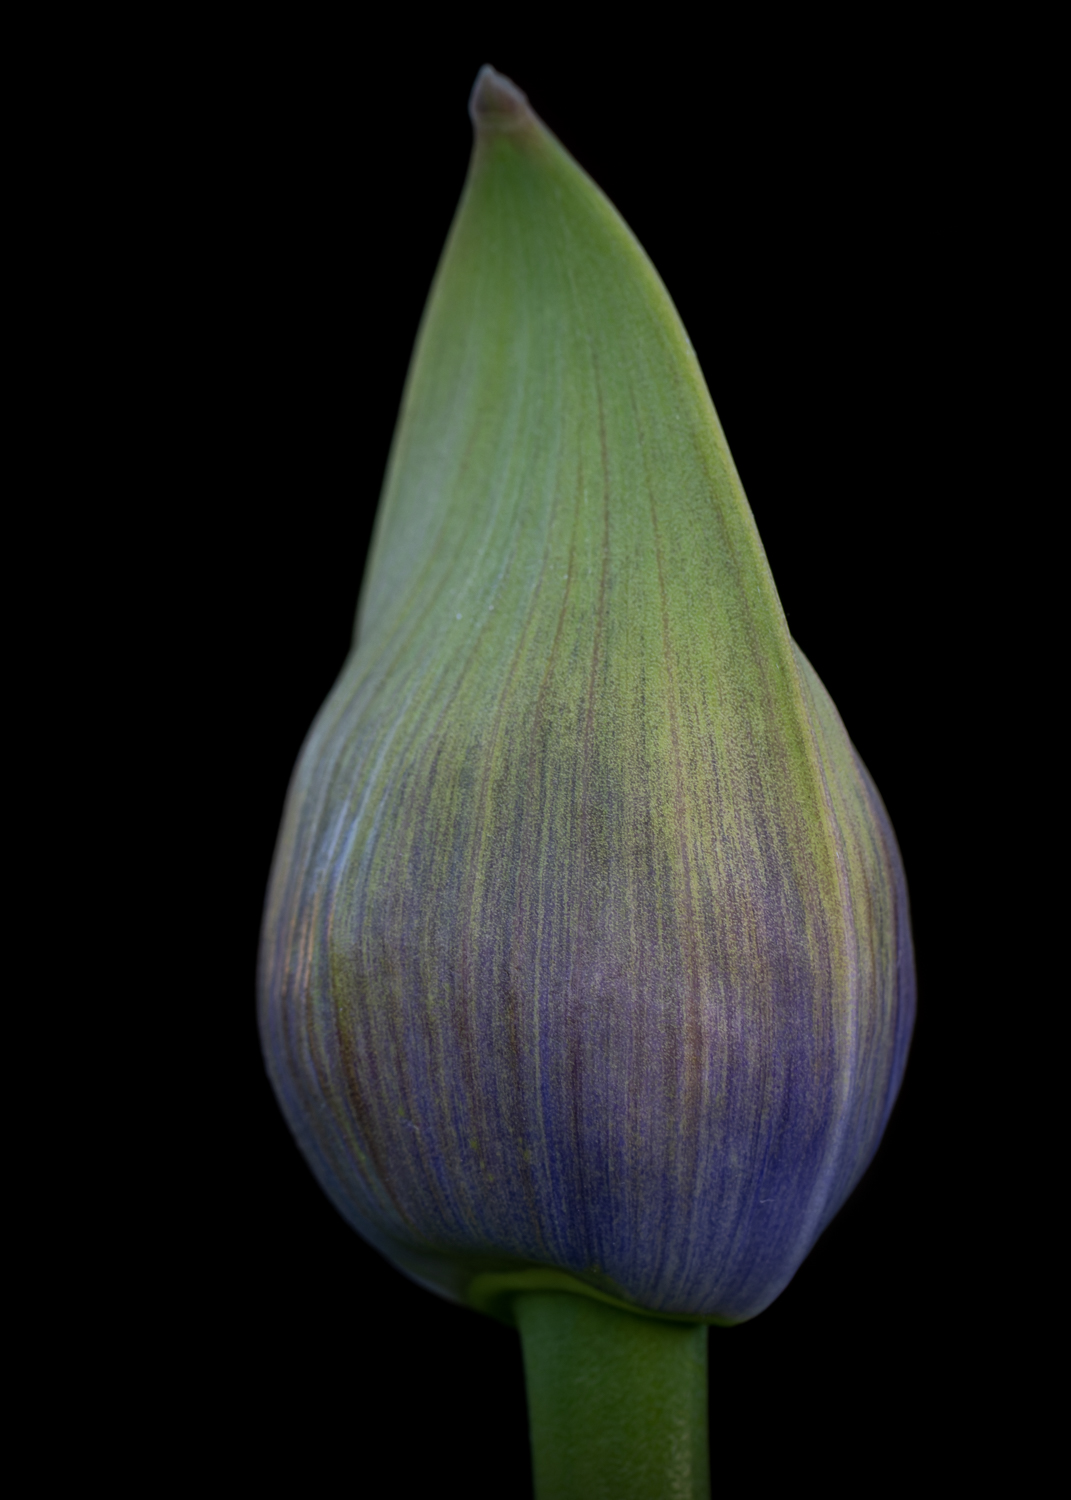 A close up image of a purple agapanthus bud against a dark background